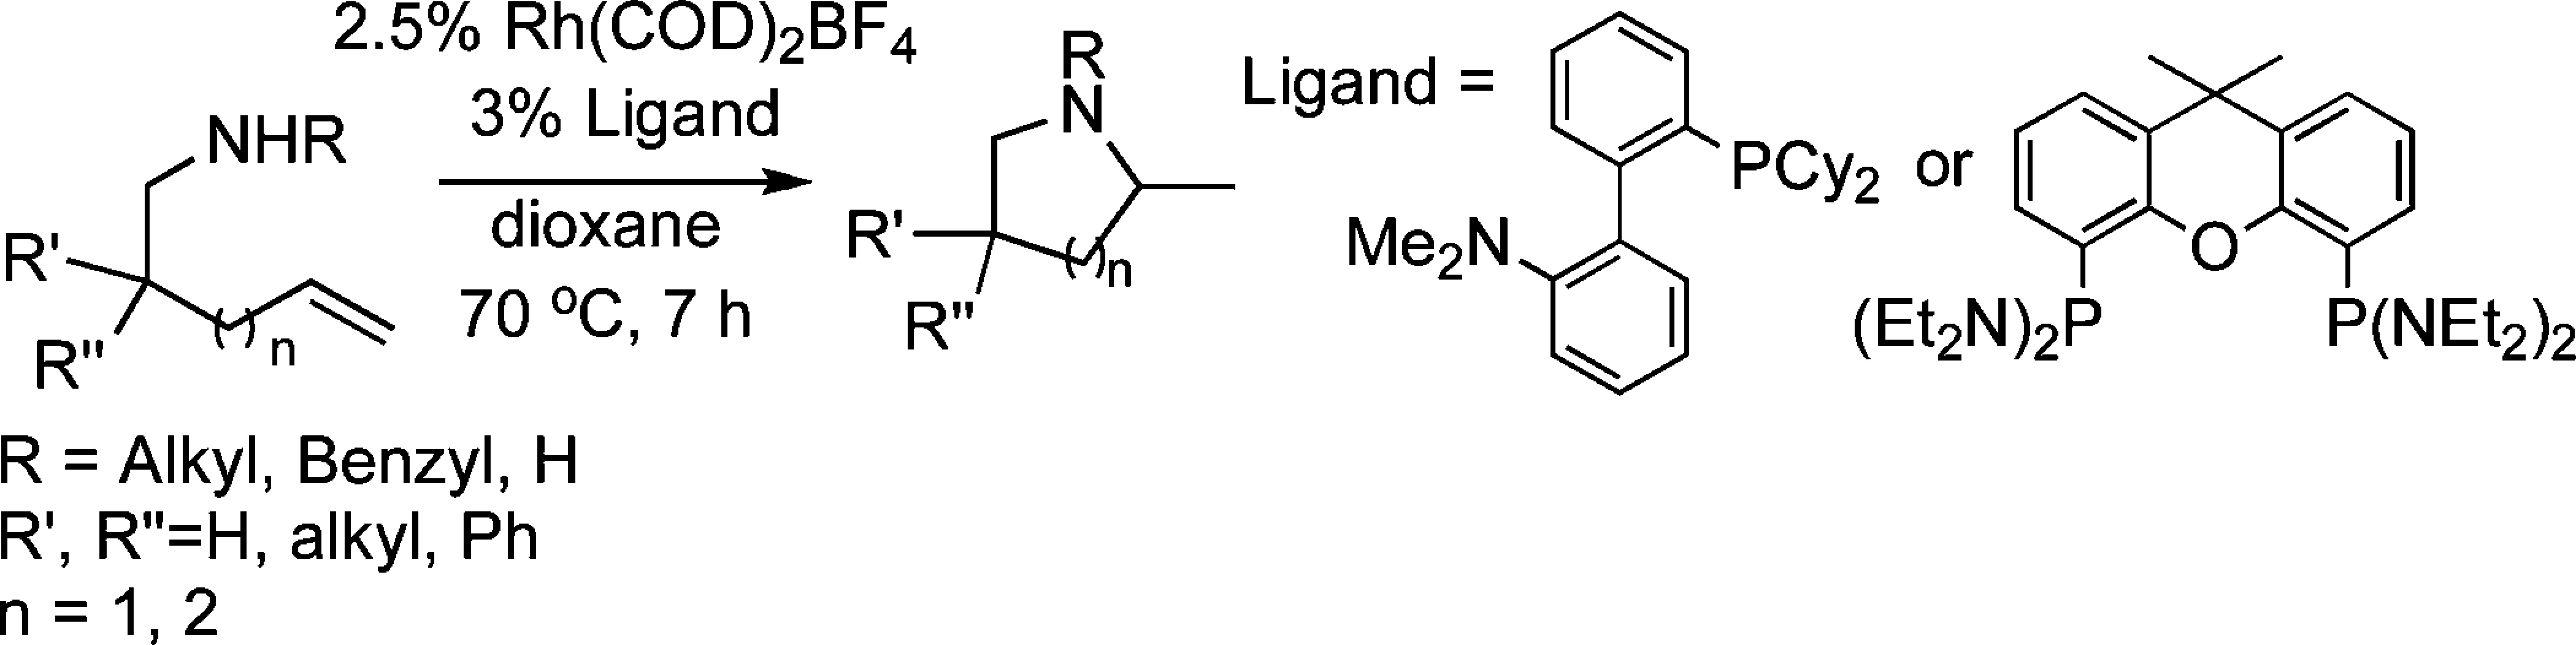 Mild, Rhodium-Catalyzed Intramolecular Hydroamination of Unactivated Terminal and Internal Olefins with Primary and Secondary Amines.